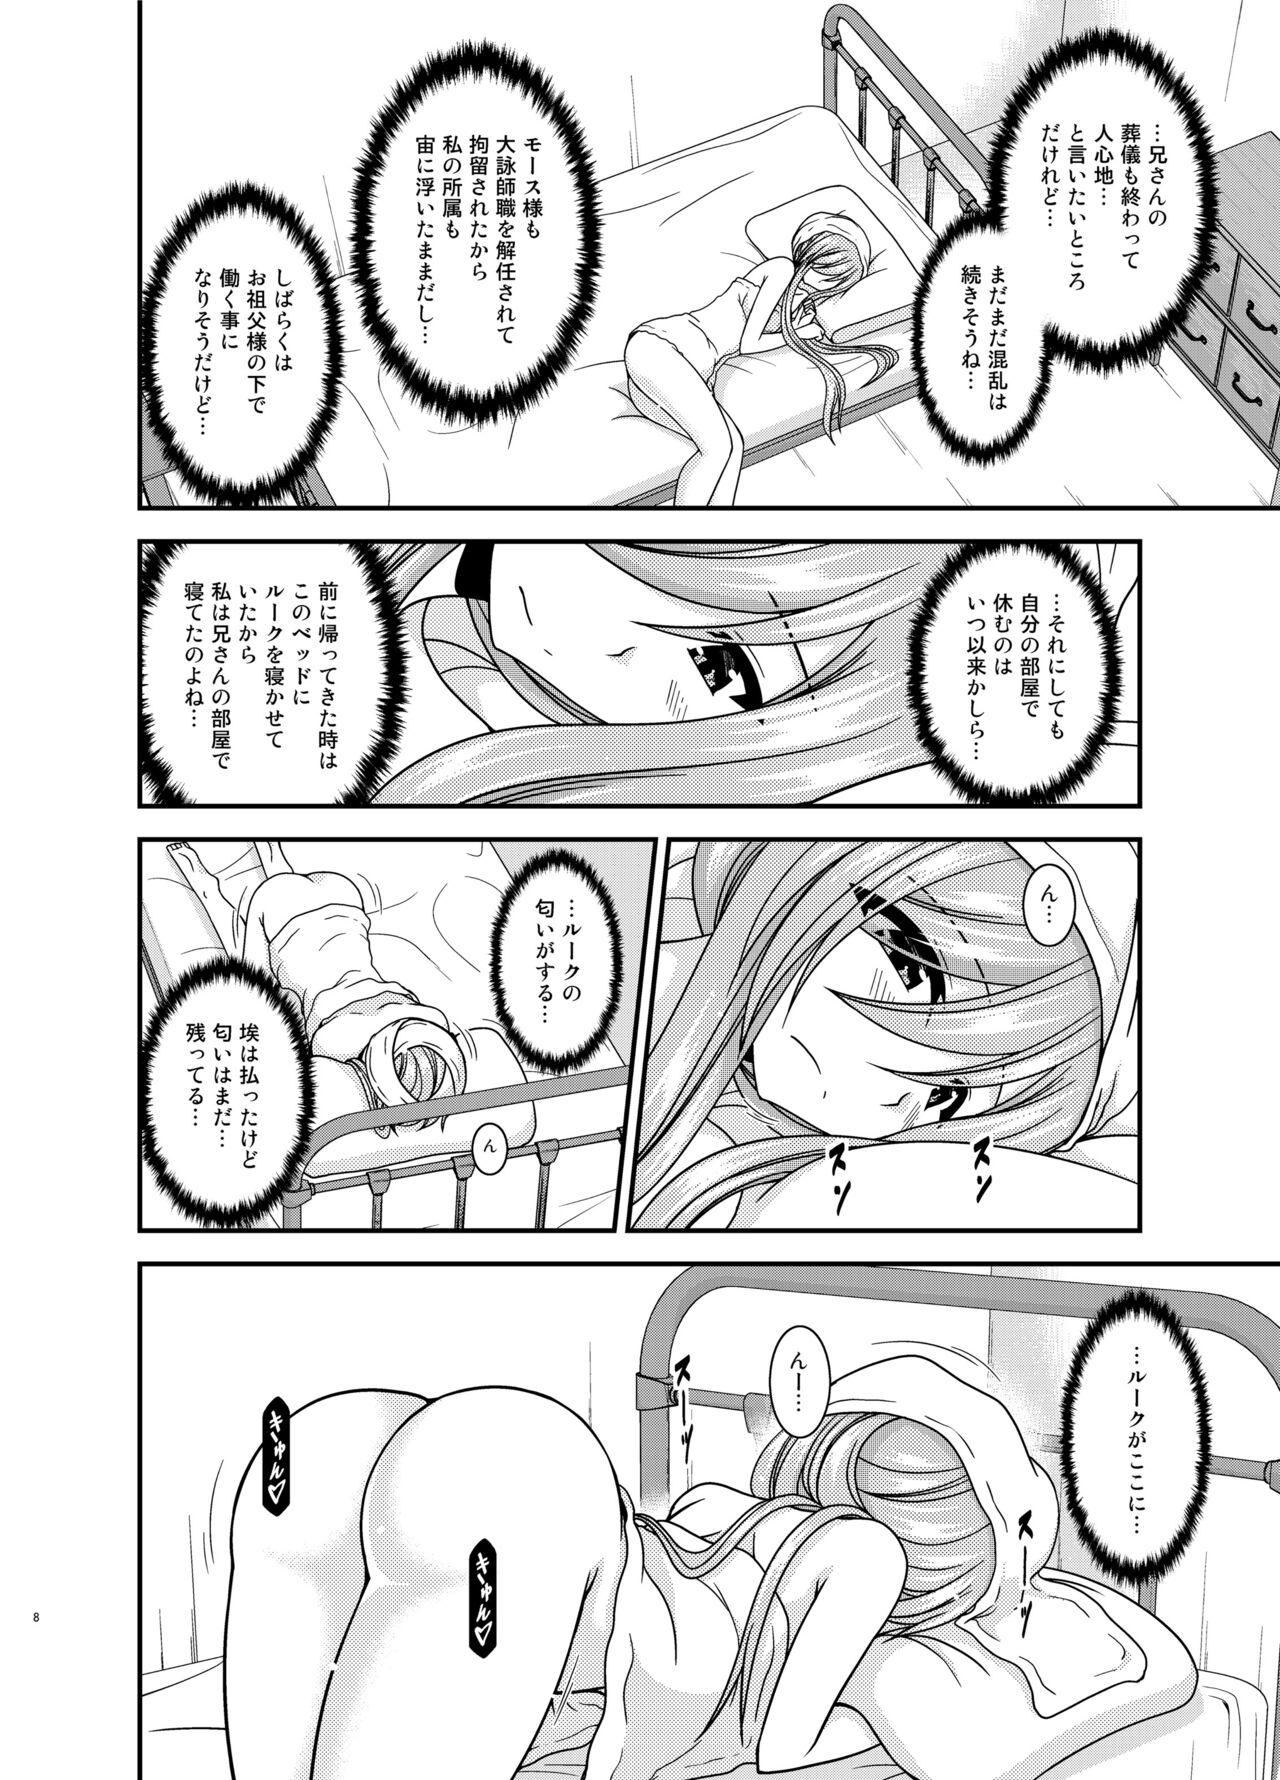 Dirty Talk Melon ga Chou Shindou! R15 - Tales of the abyss Vaginal - Page 8